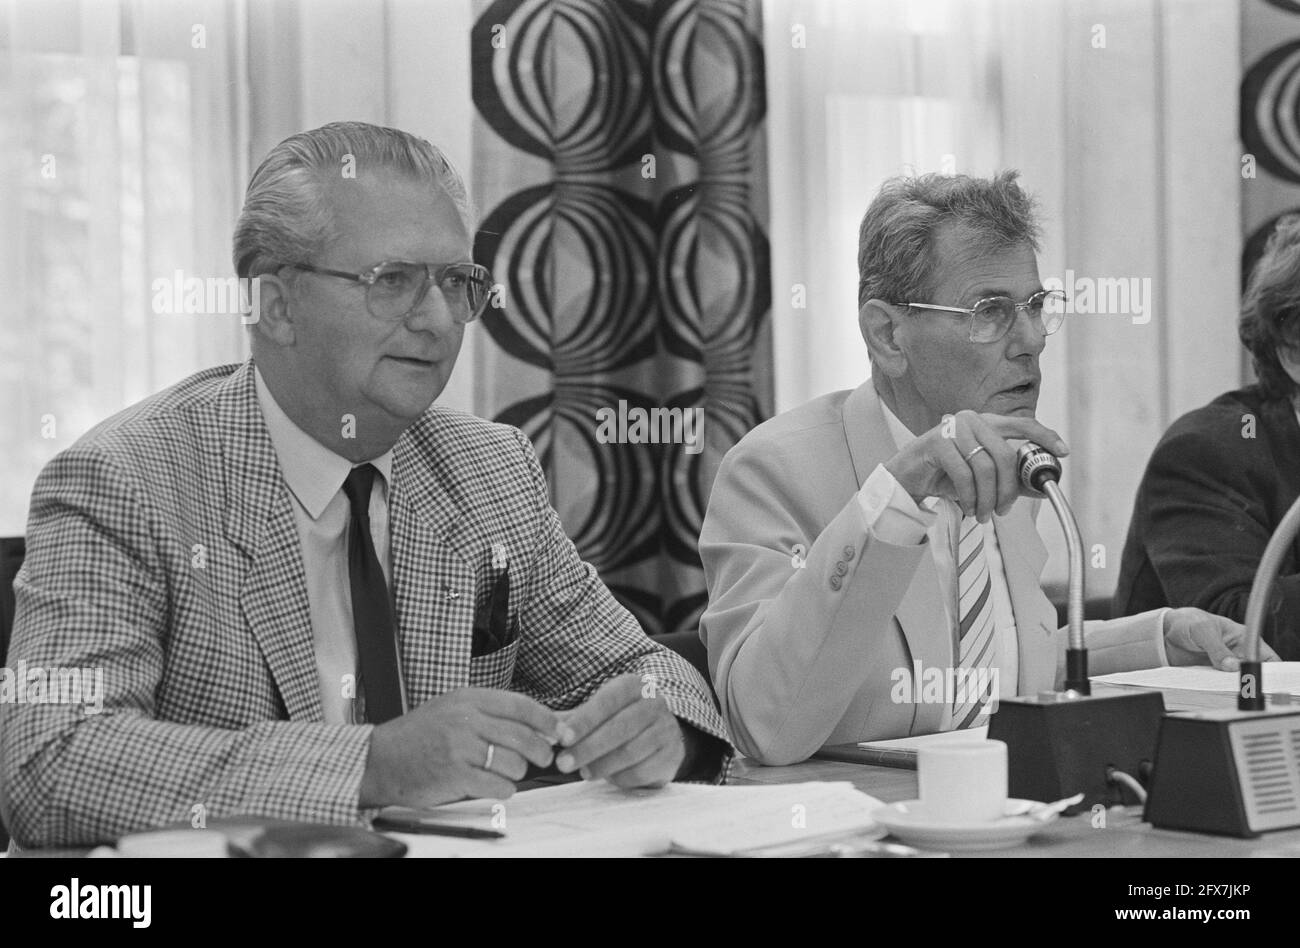 House Committee. Civil Service hearing civil servants' organizations on employment conditions policy; CFO chairman De Jong (l) and Abva/Kabo vice-chairman Sanneveld (r), September 1, 1987, House Committees, Vice-Presidents, The Netherlands, 20th century press agency photo, news to remember, documentary, historic photography 1945-1990, visual stories, human history of the Twentieth Century, capturing moments in time Stock Photo